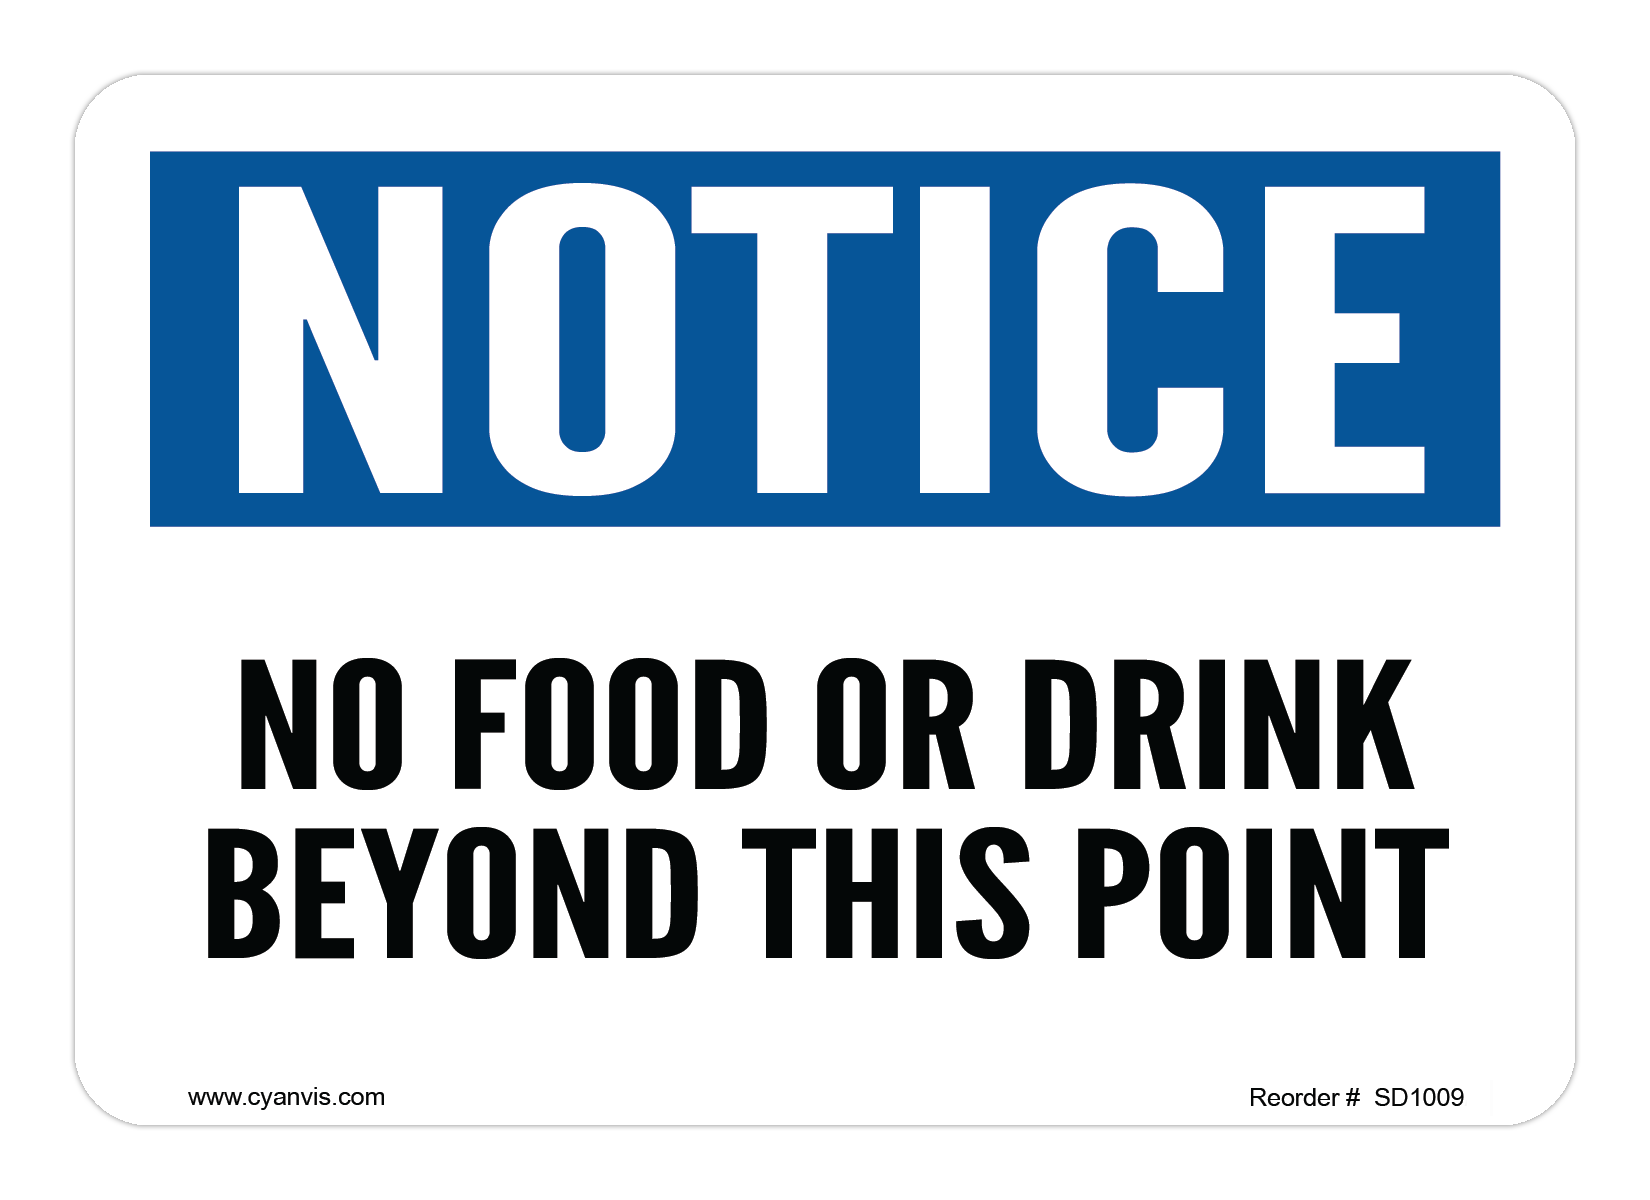 Safety Sign: Notice - NO FOOD OR DRINK BEYOND THIS POINT - CYANvisuals